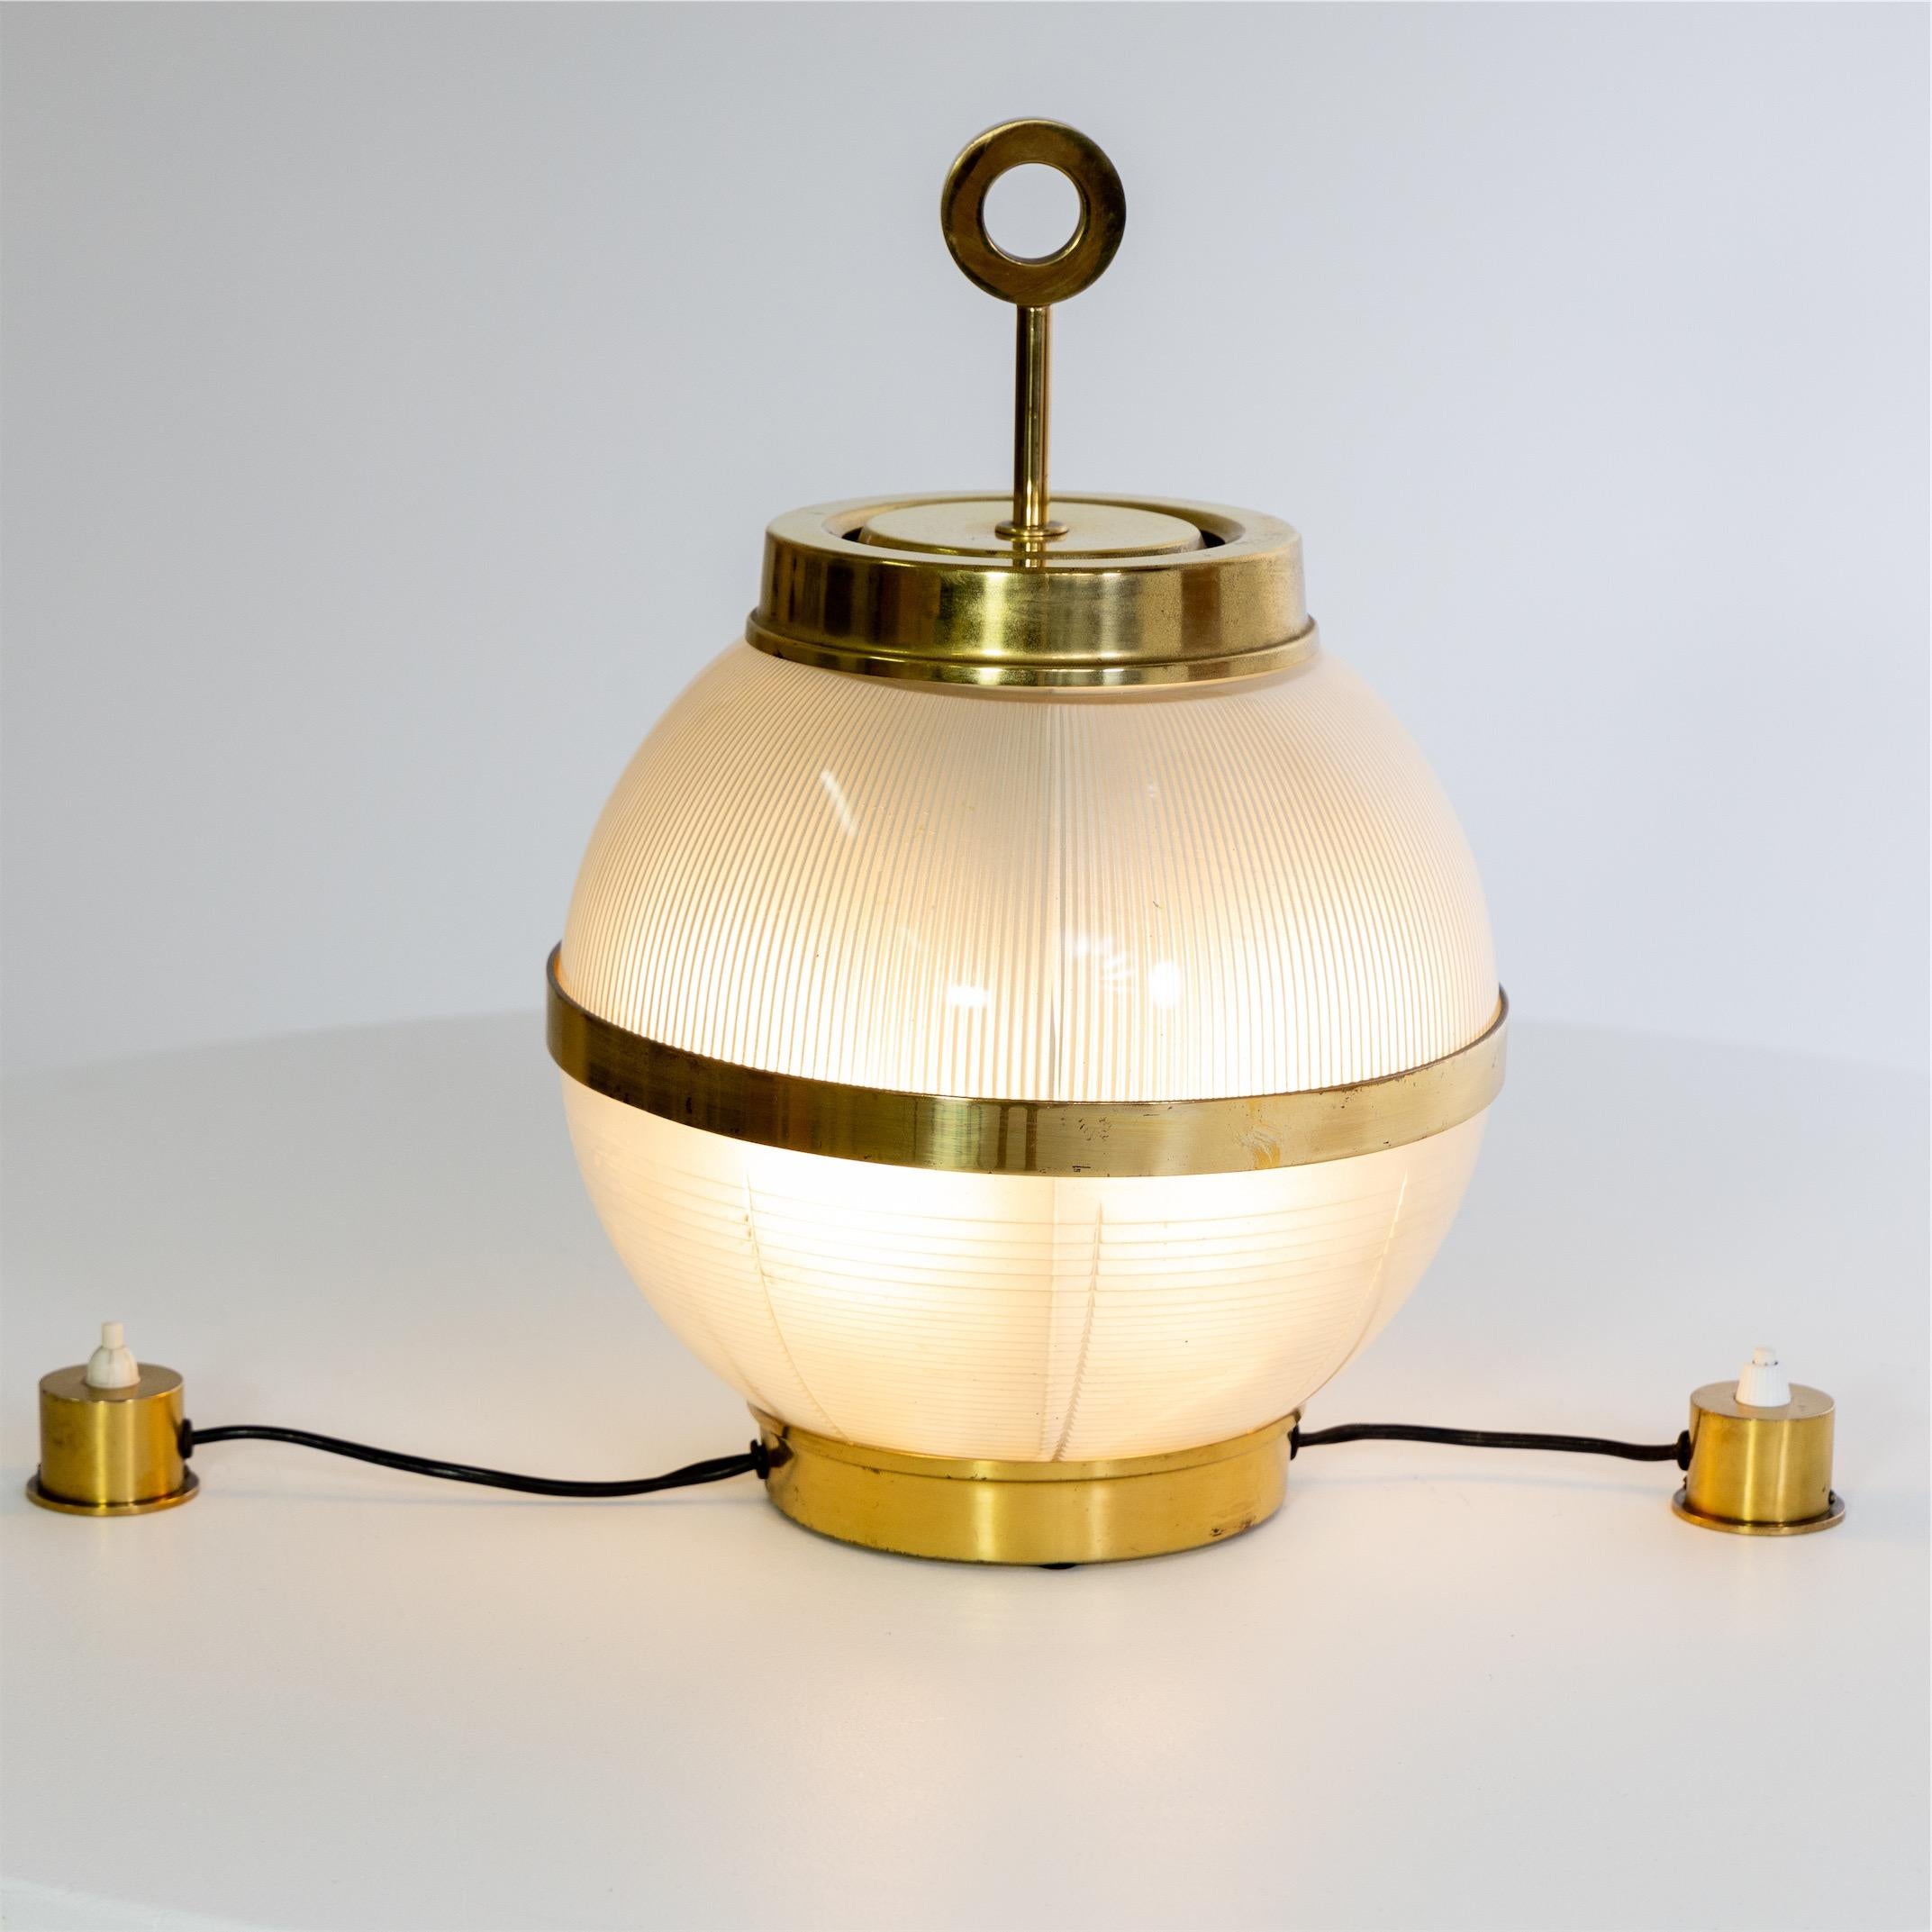 Table lamp with spherical glass body with brass mounts and two separate light switches.